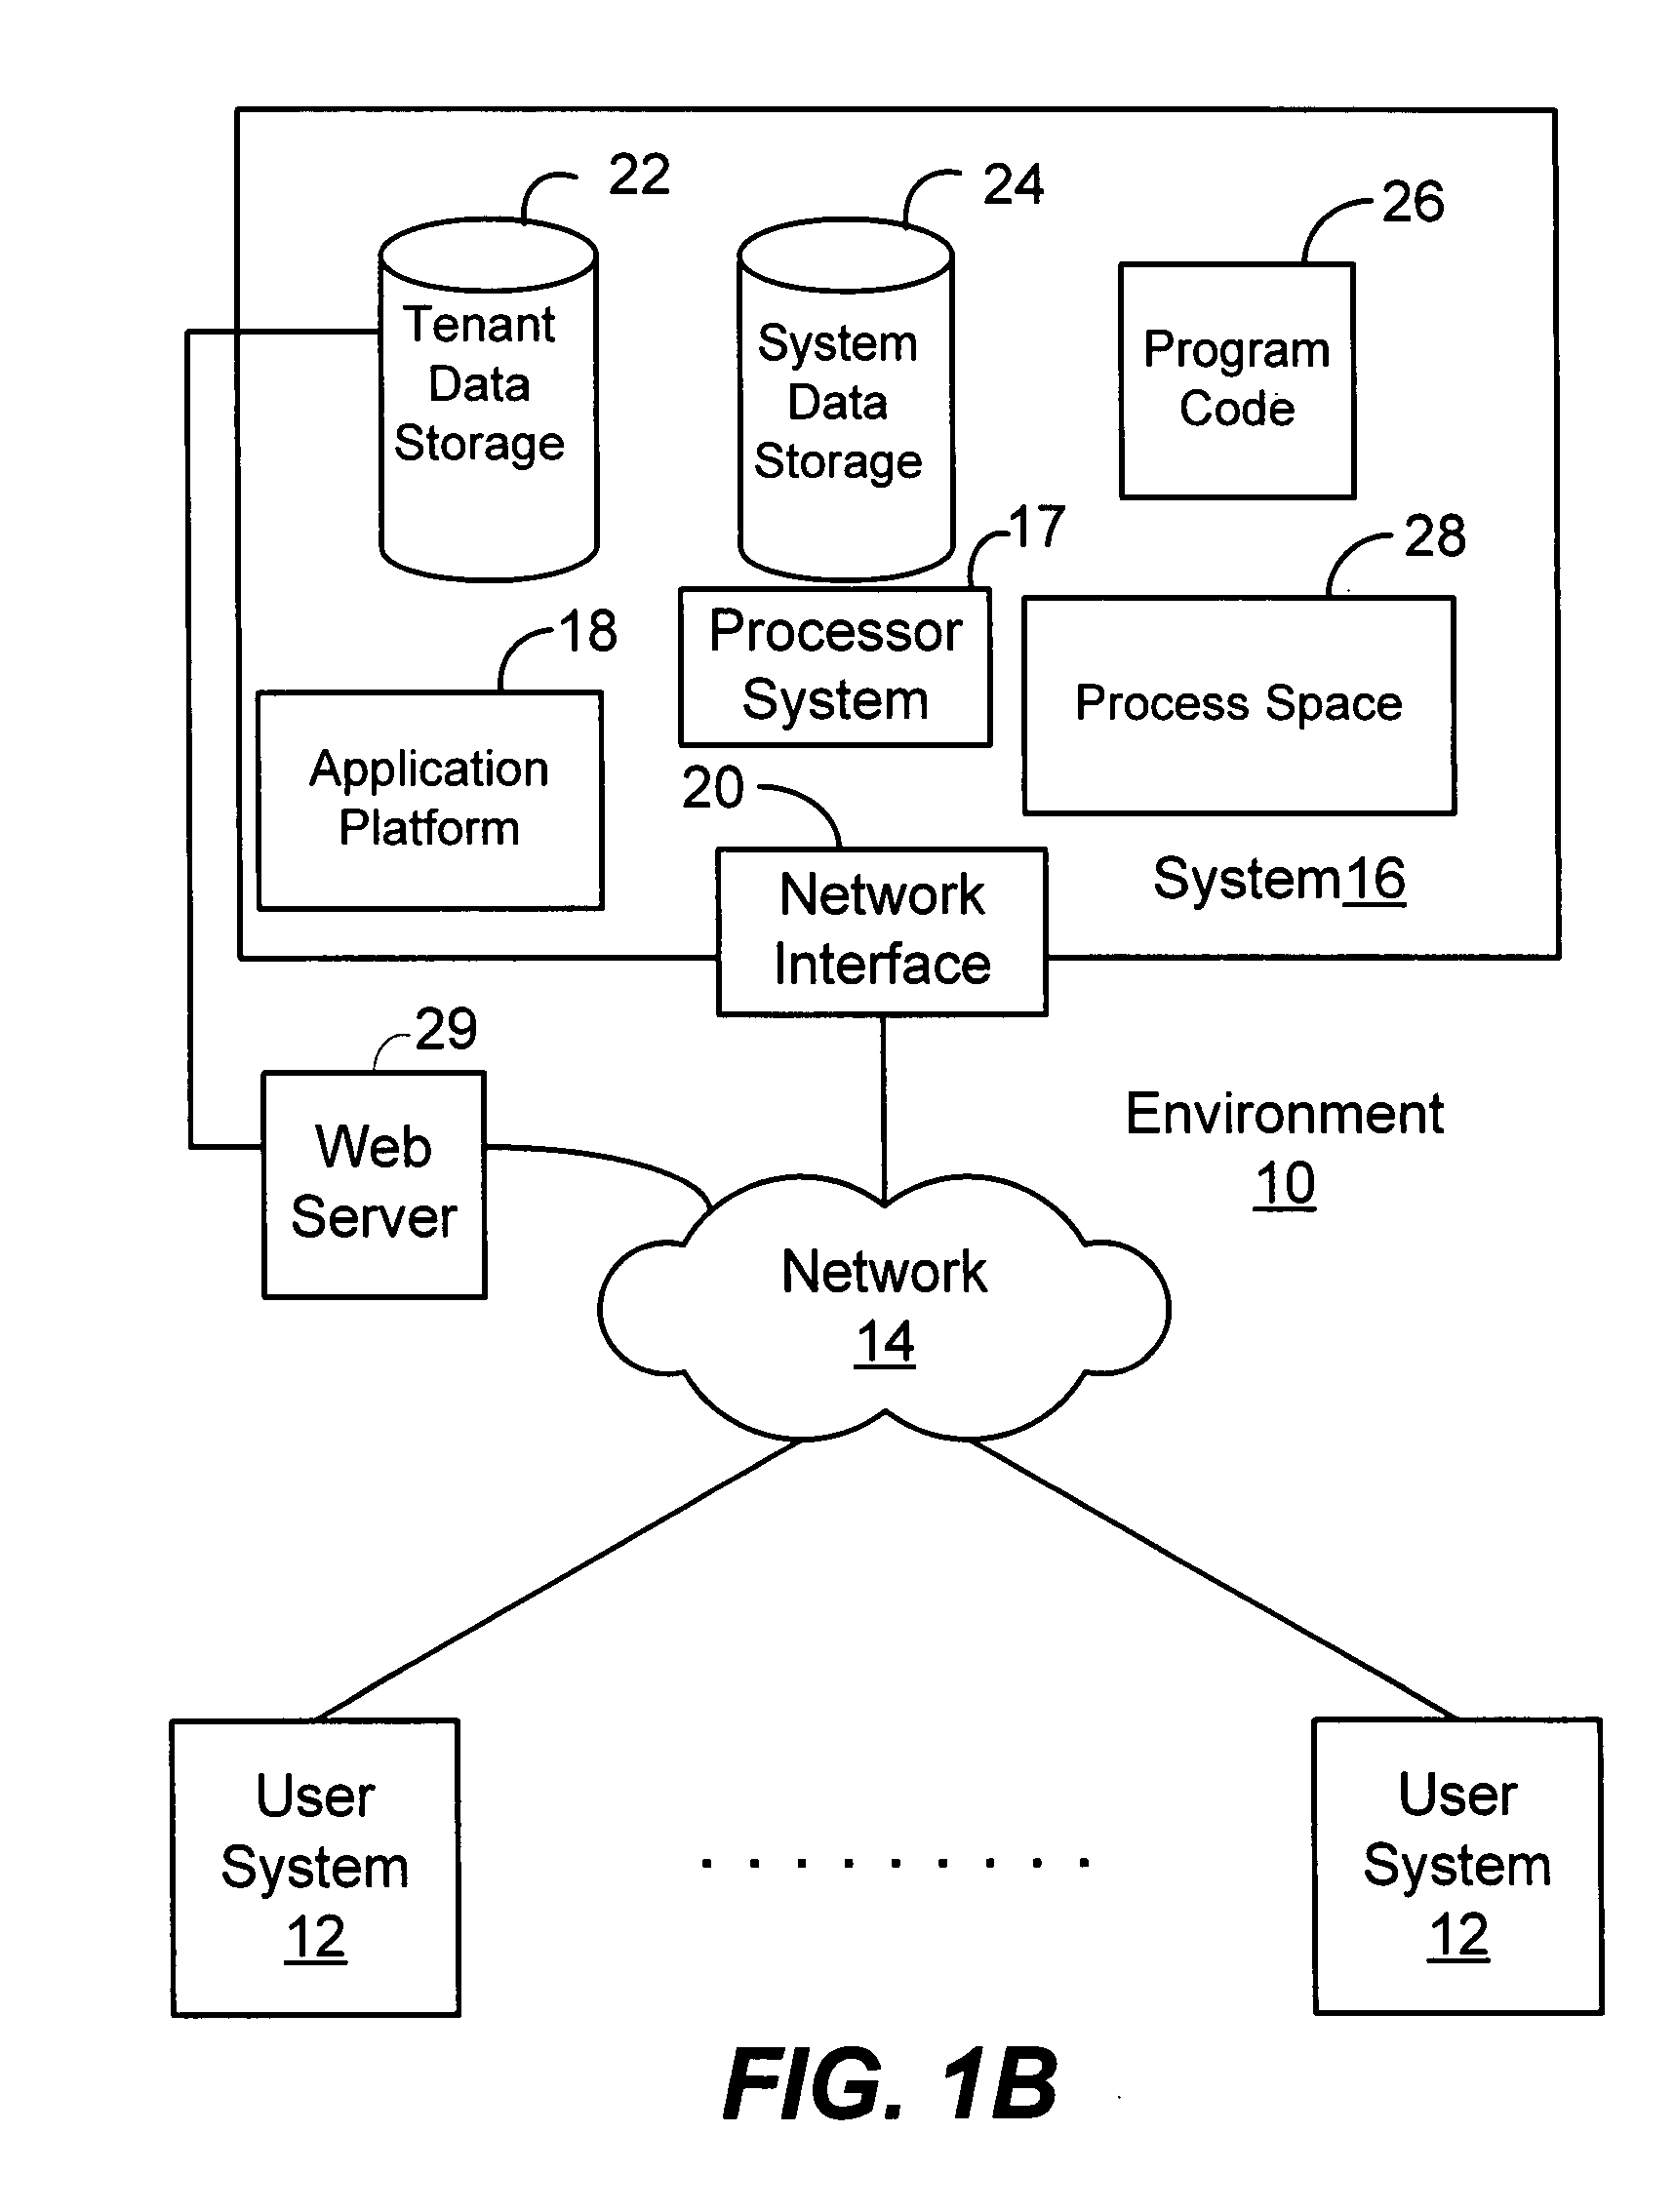 Method and system for posting ideas to a reconfigurable website